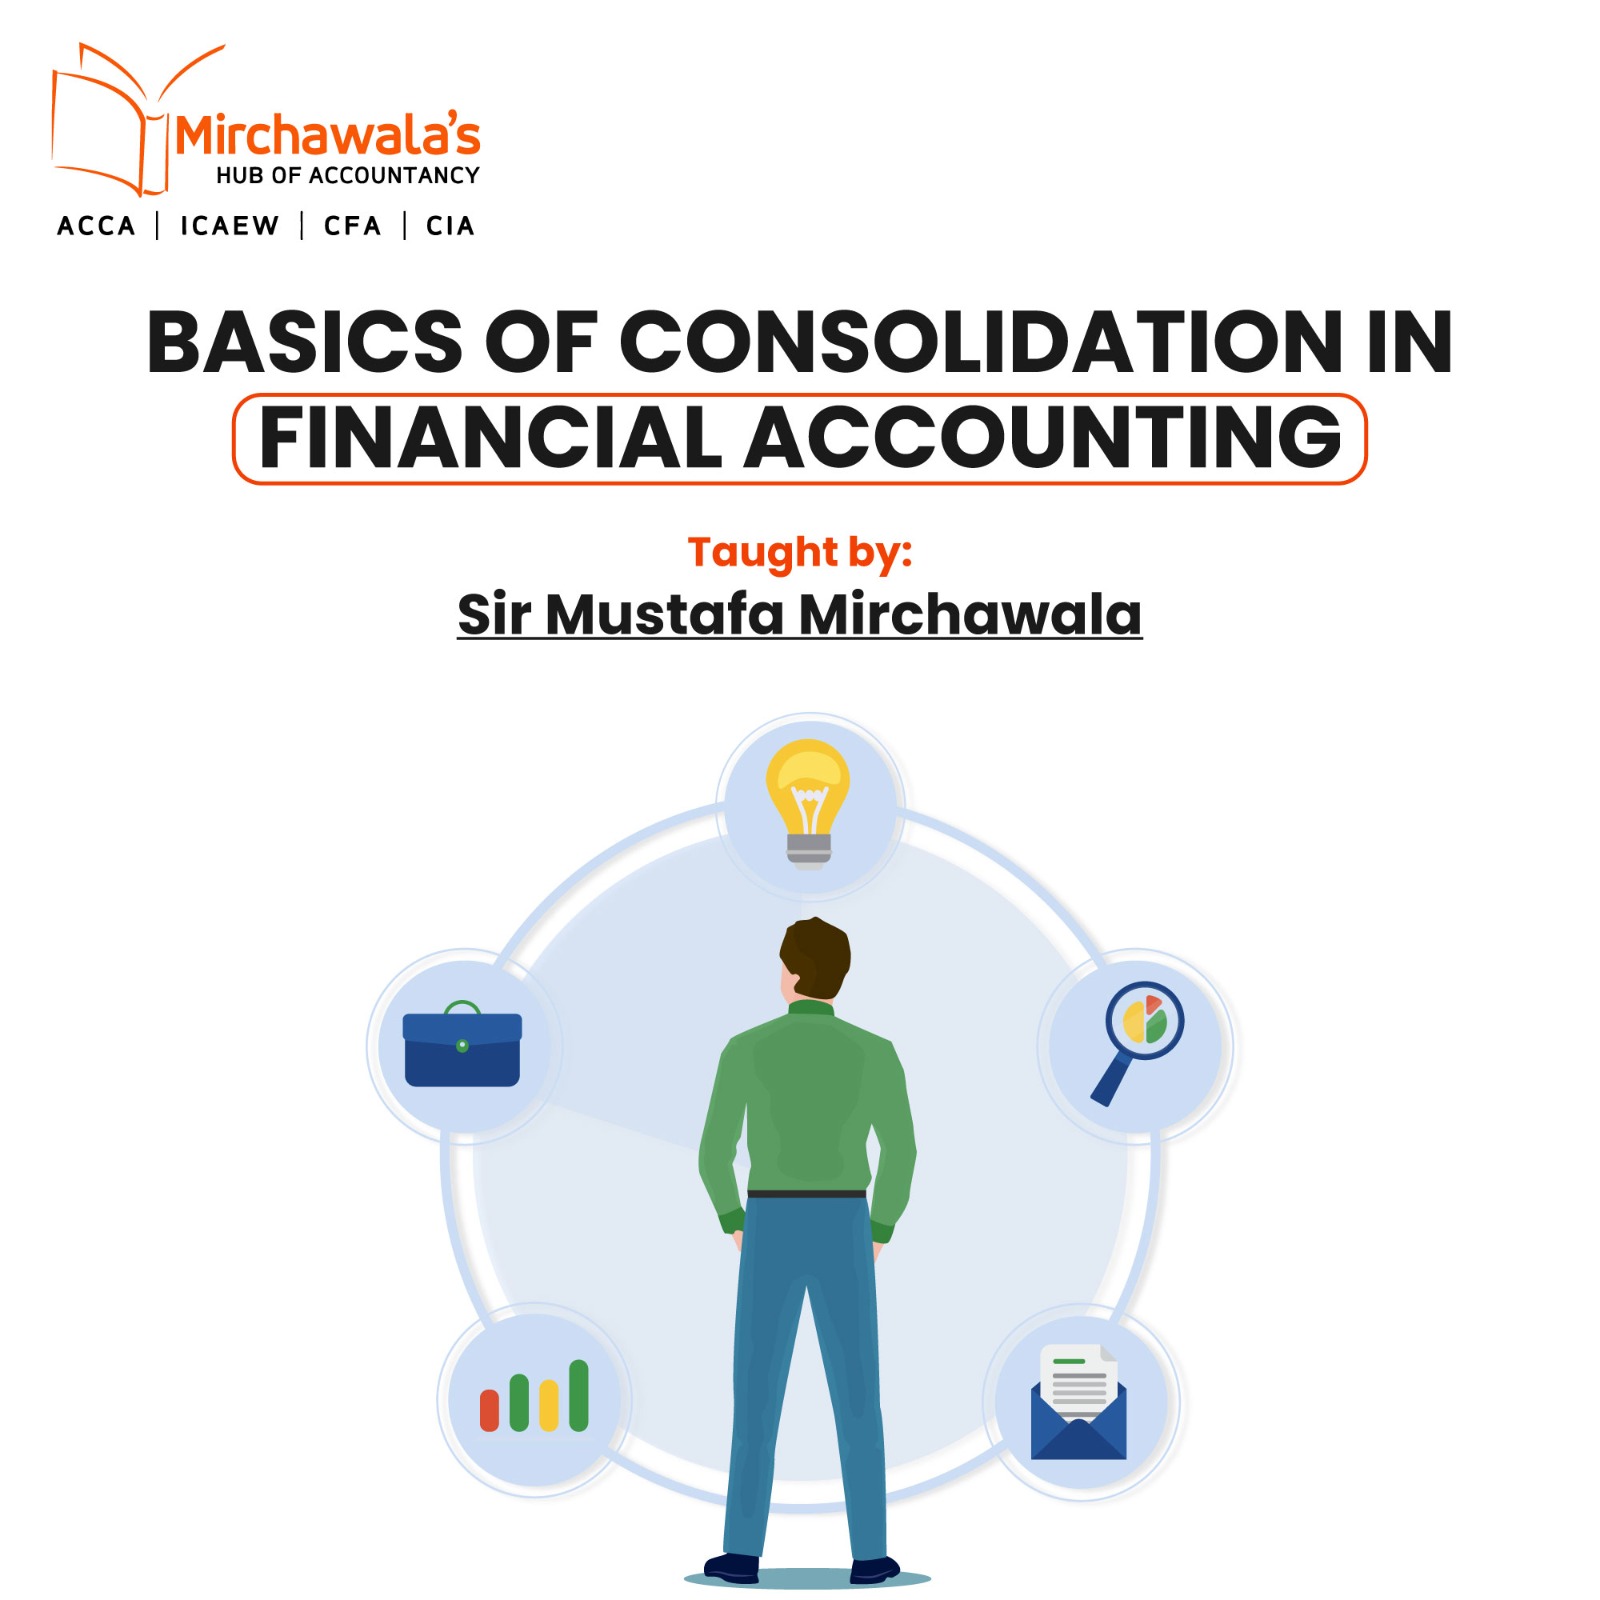 The Basics of Consolidation in Financial Accounting